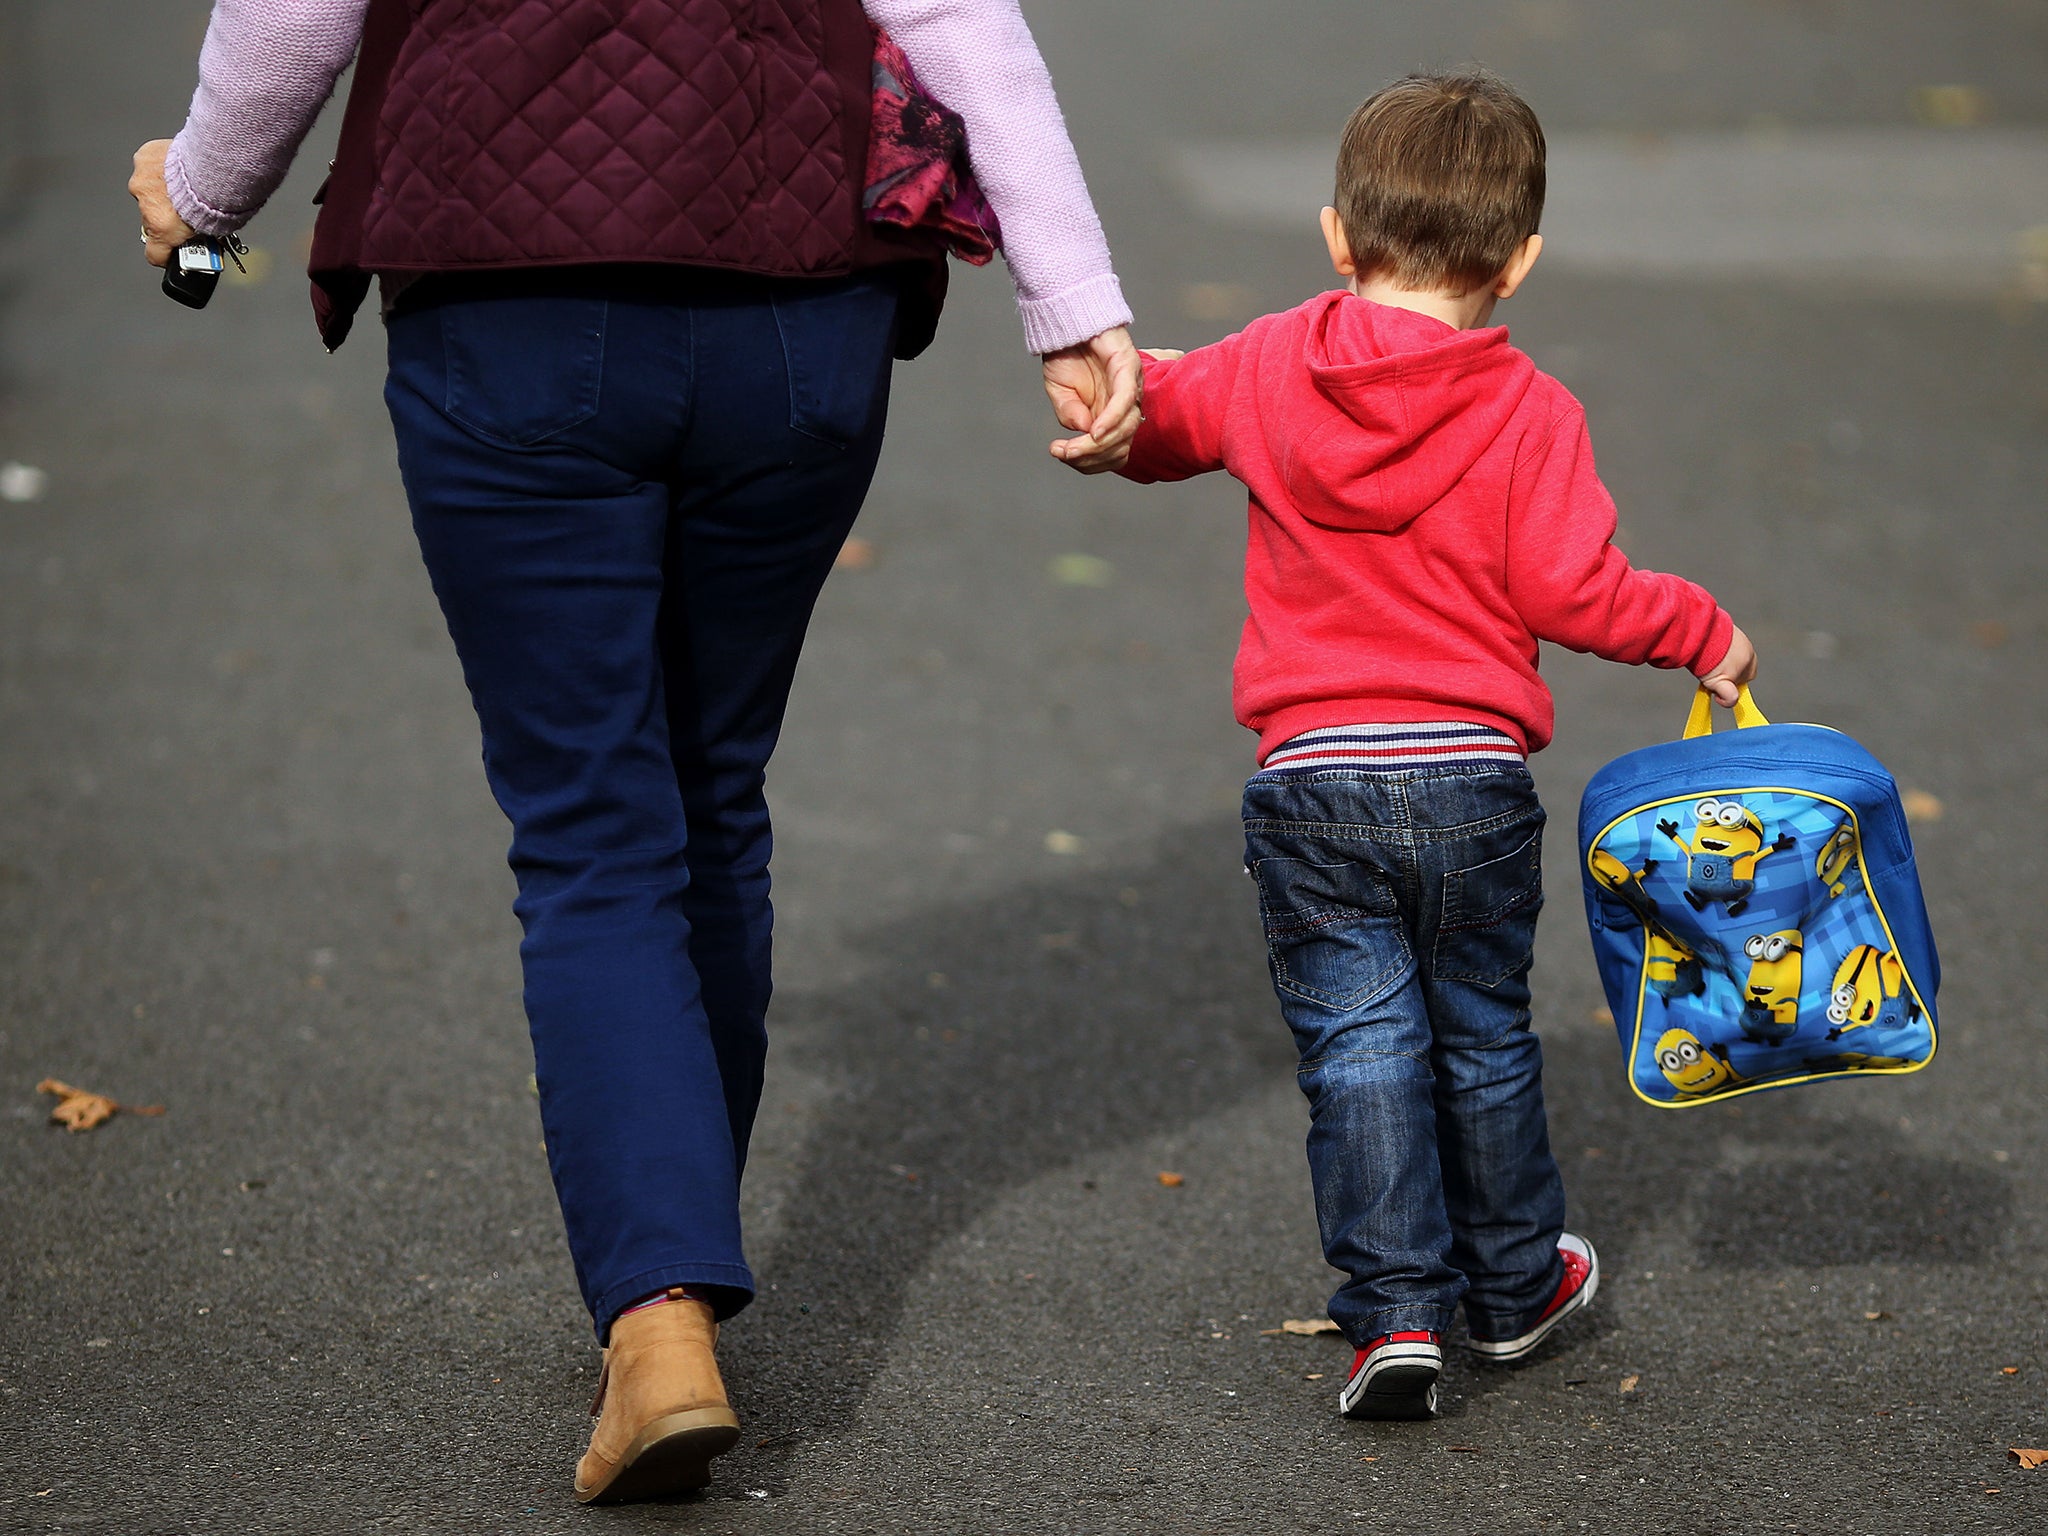 State-run nurseries are at risk of closure if funding is discontinued, MPs say